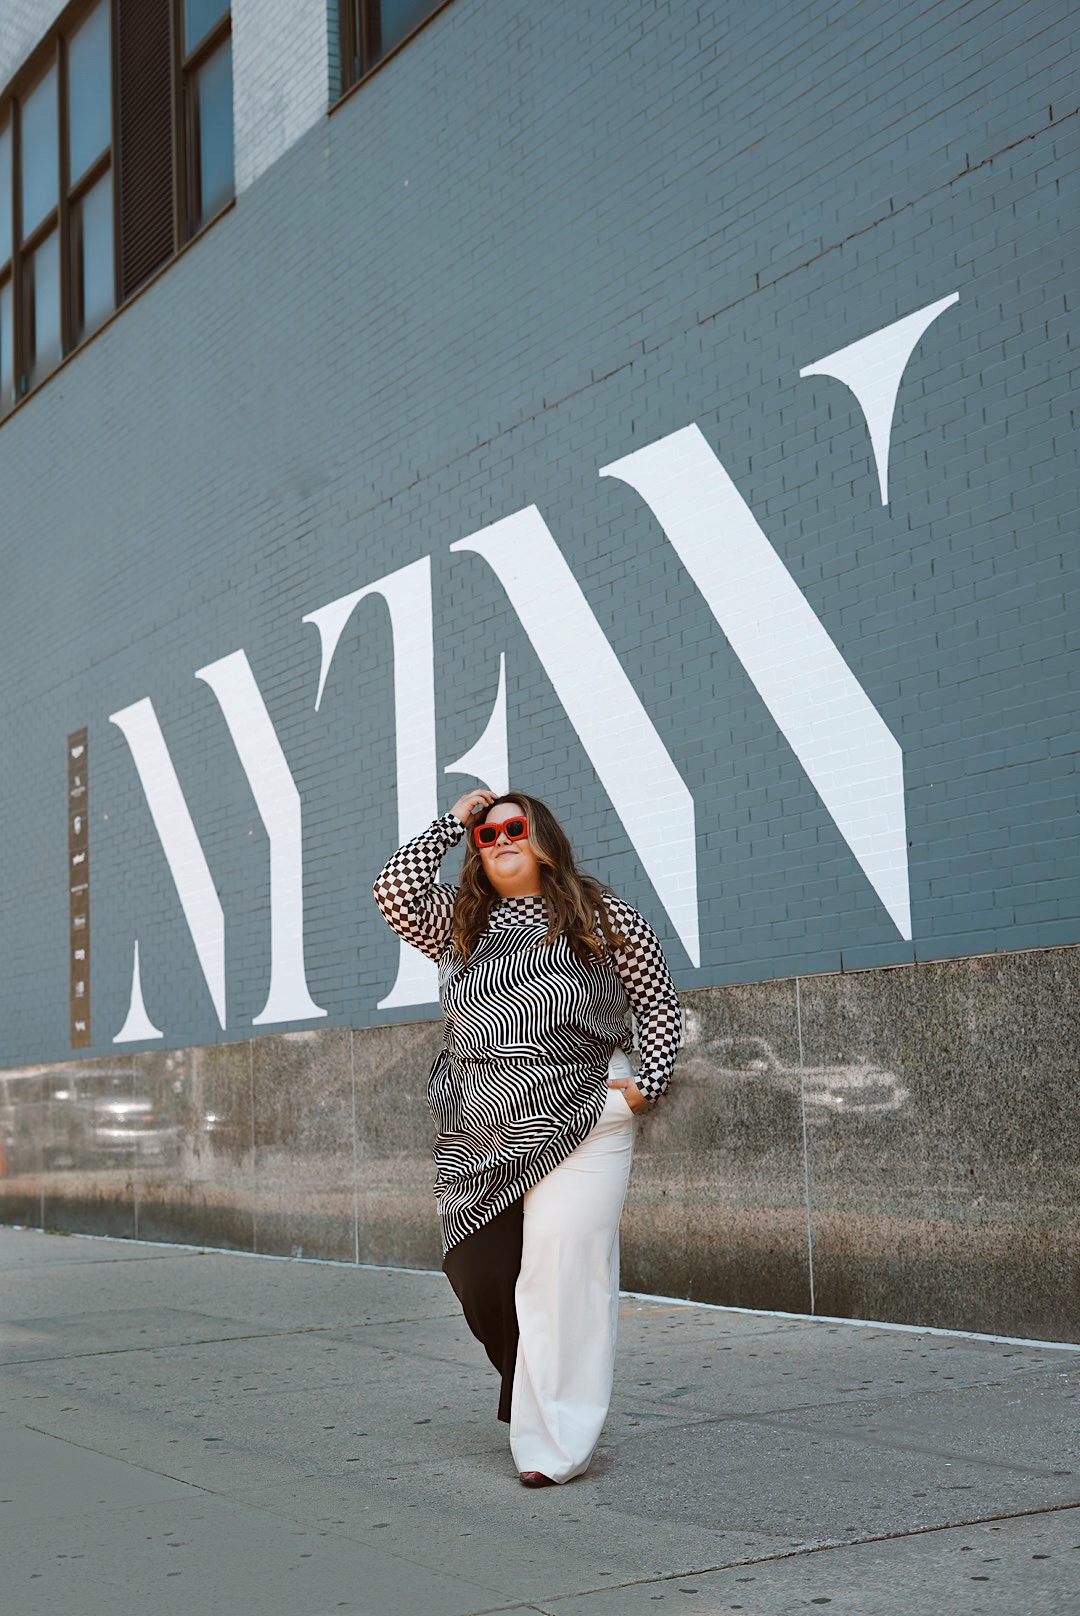 Plus size fashion blogger Natalie in the City shares her NYFW plus size outfits SS'24 that she wore during New York Fashion Week.